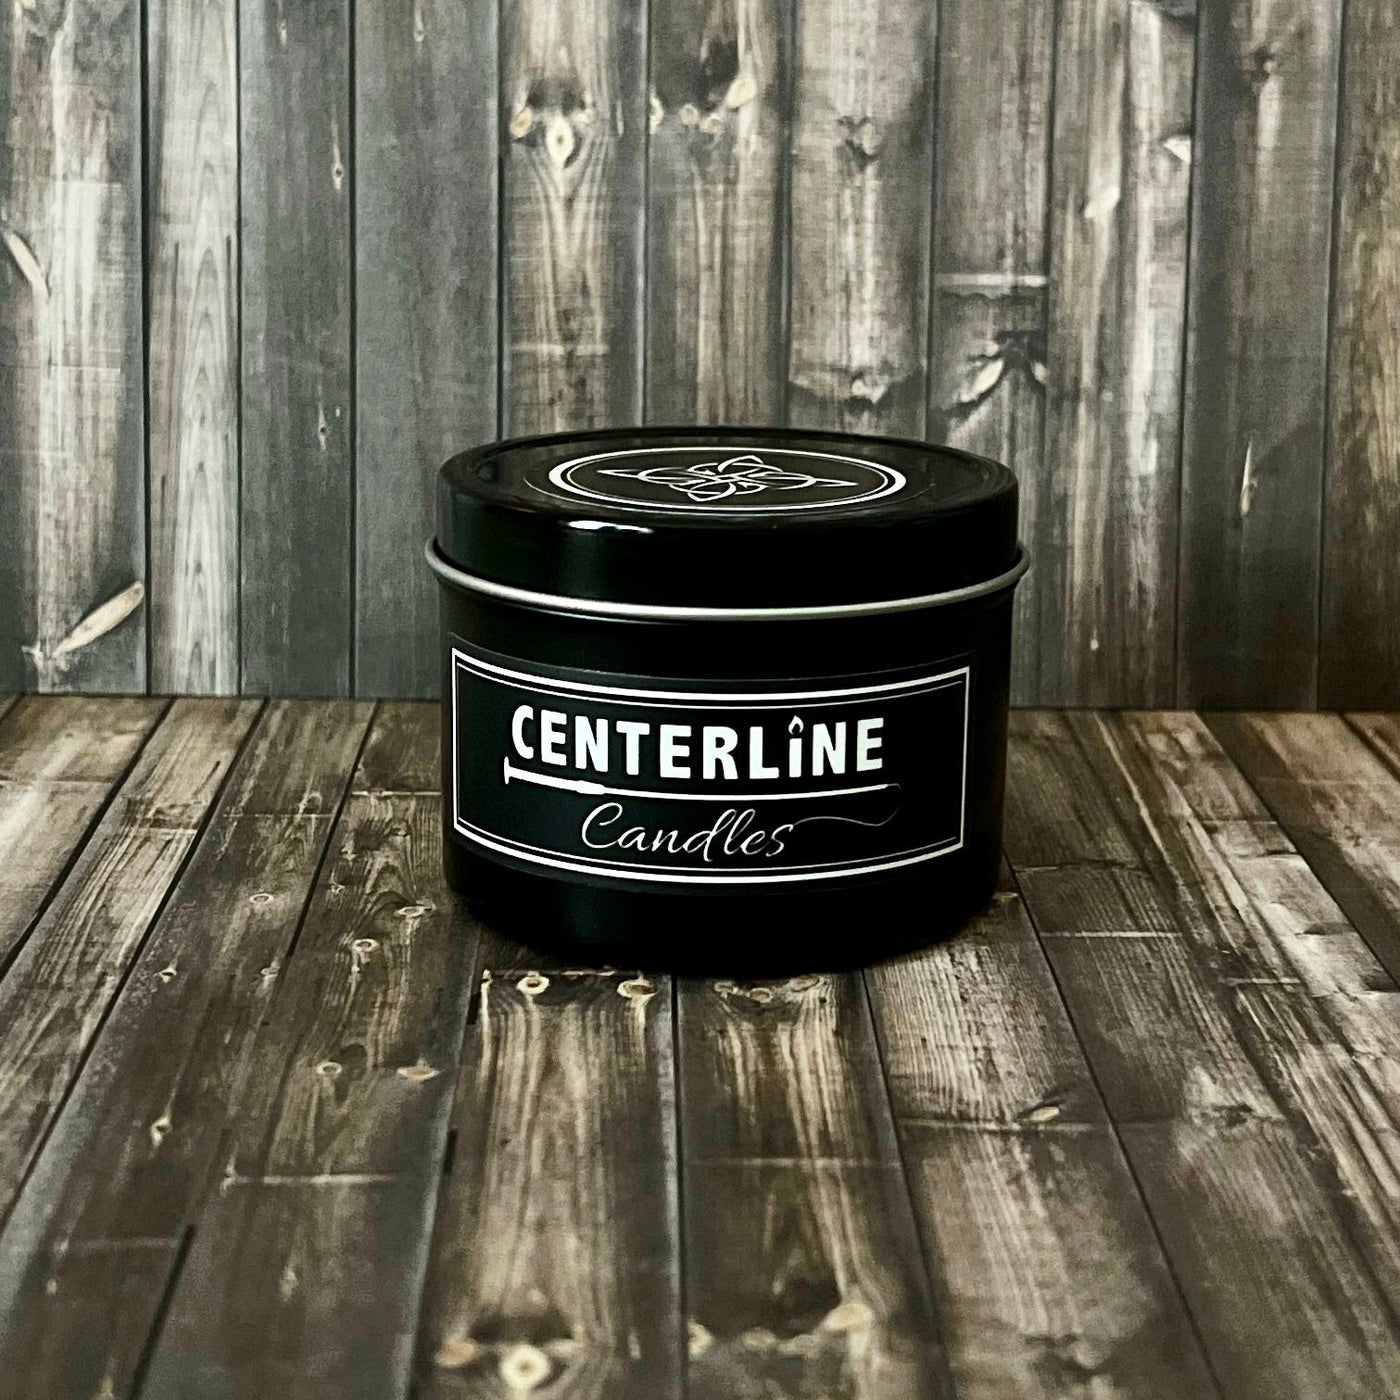 Blue Spruce by Centerline Candles